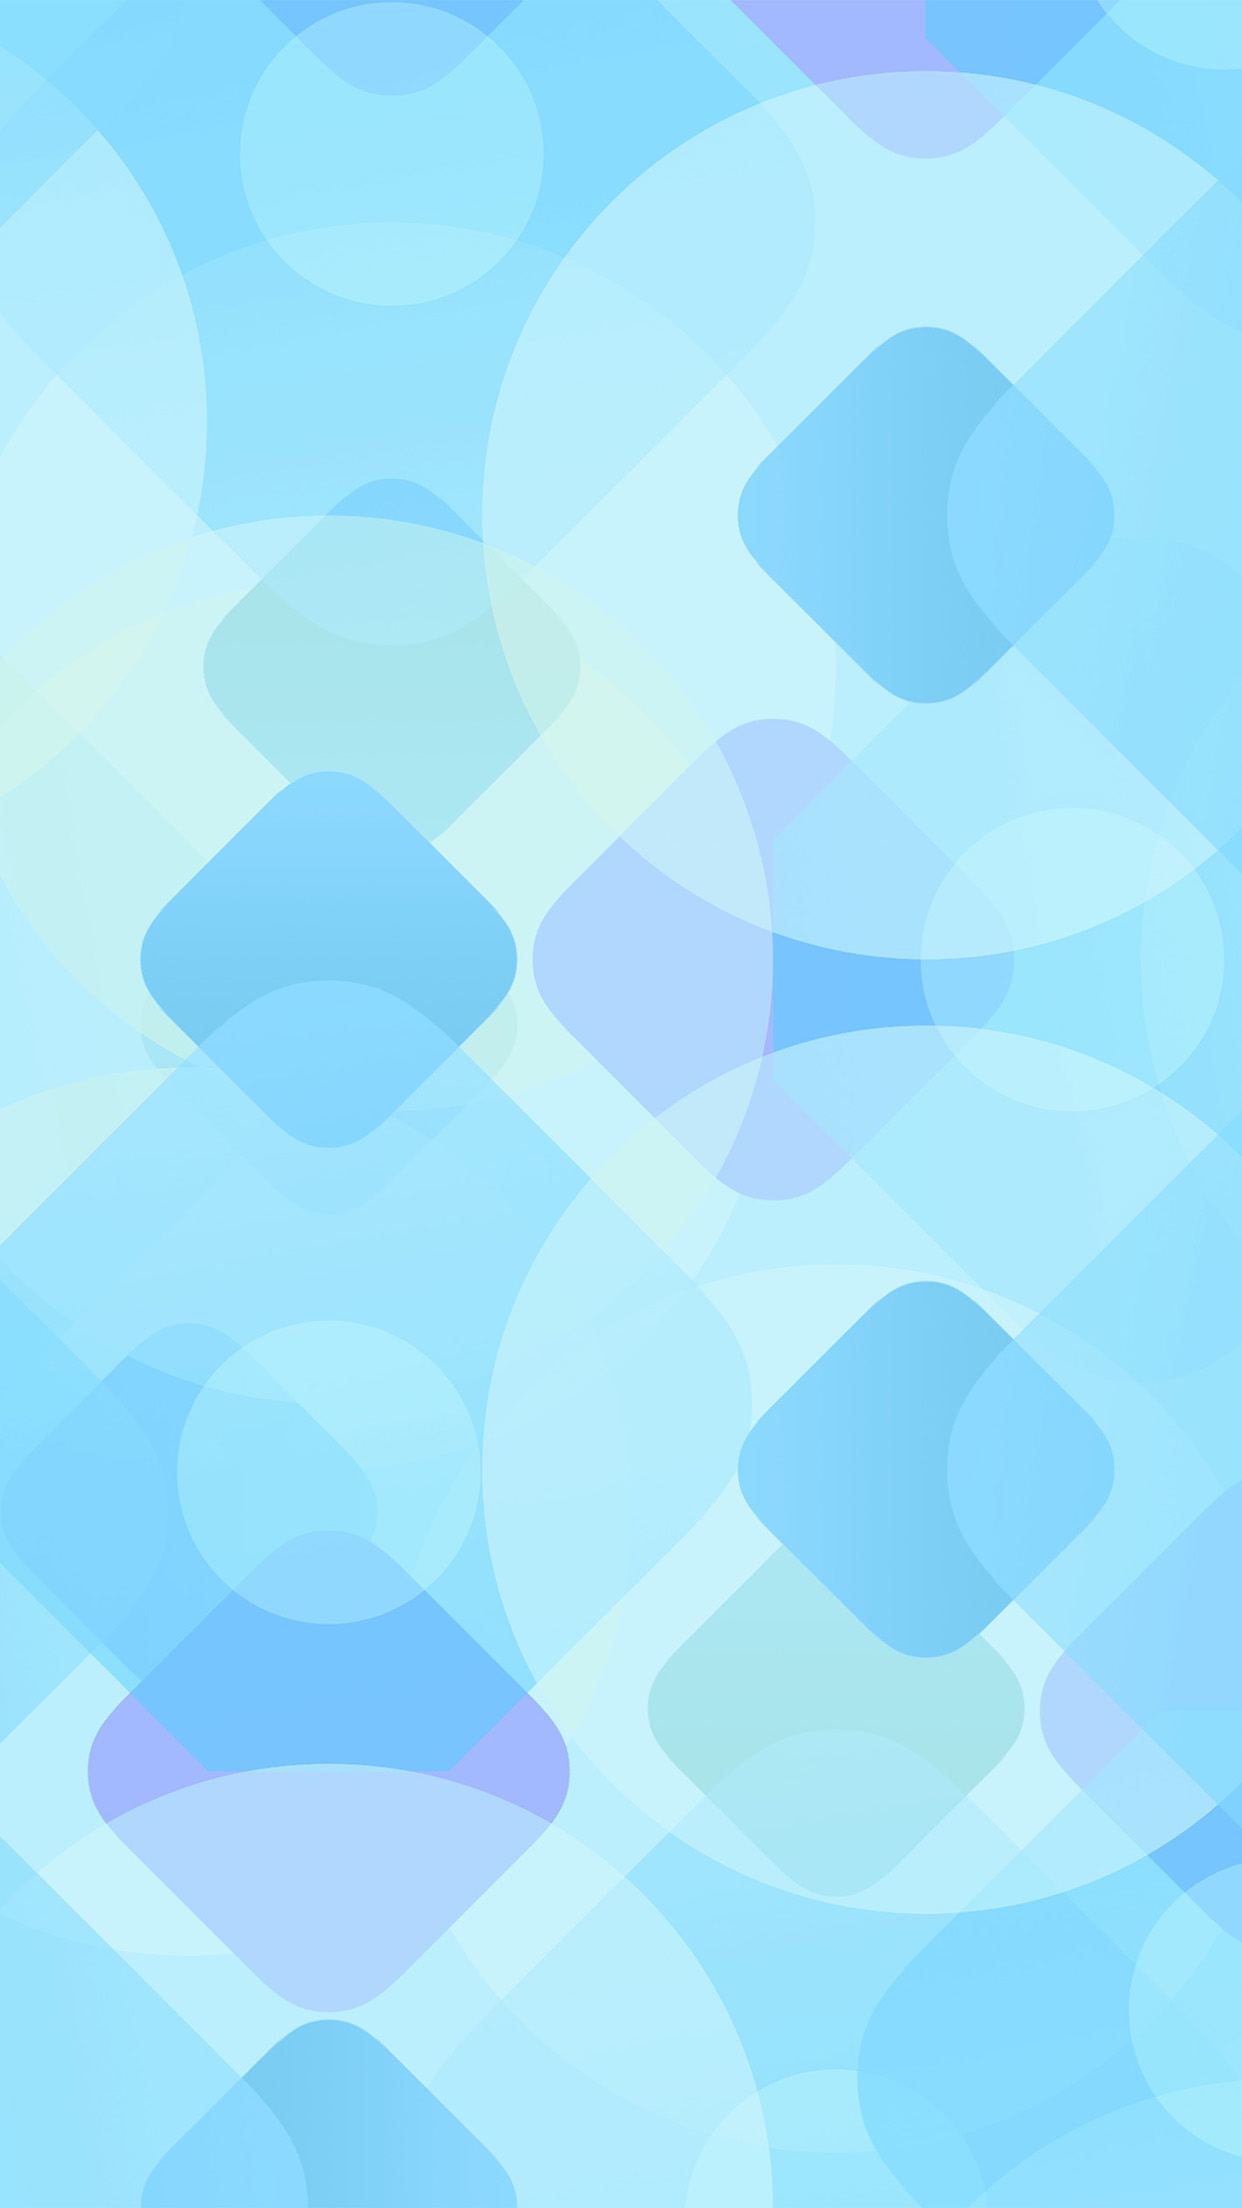 Ar7 Apple Wwdc Blue Pattern Android wallpaper